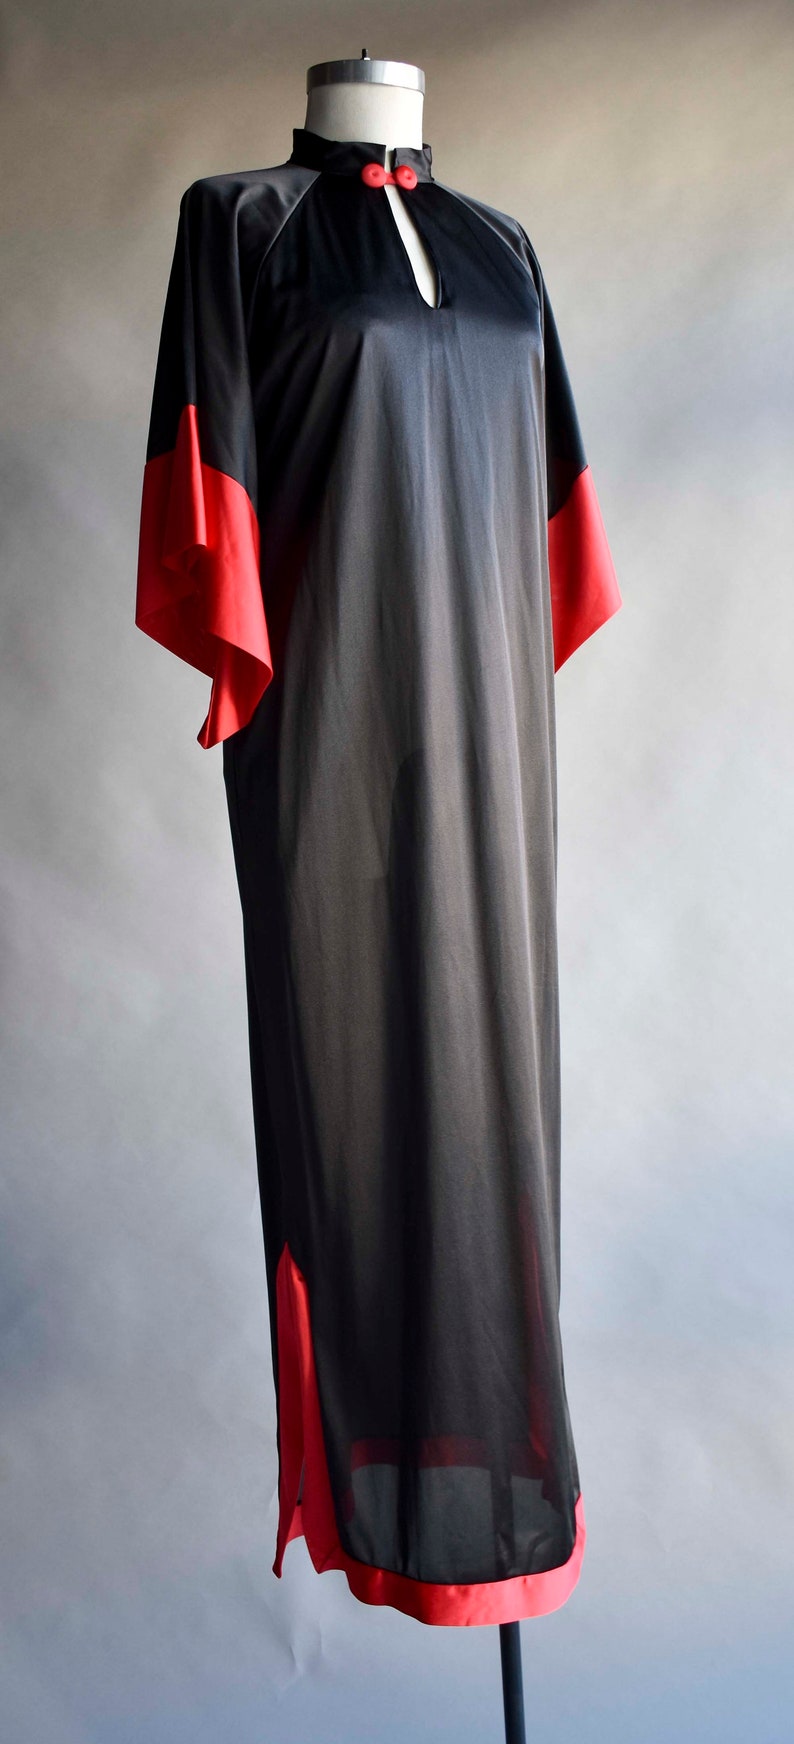 Vintage 70s Black and Red Nightgown / 70s Long Nightgown / Gothic Vintage Nightgown / Red and Black / Black and Red Nightgown / 70s robe image 4